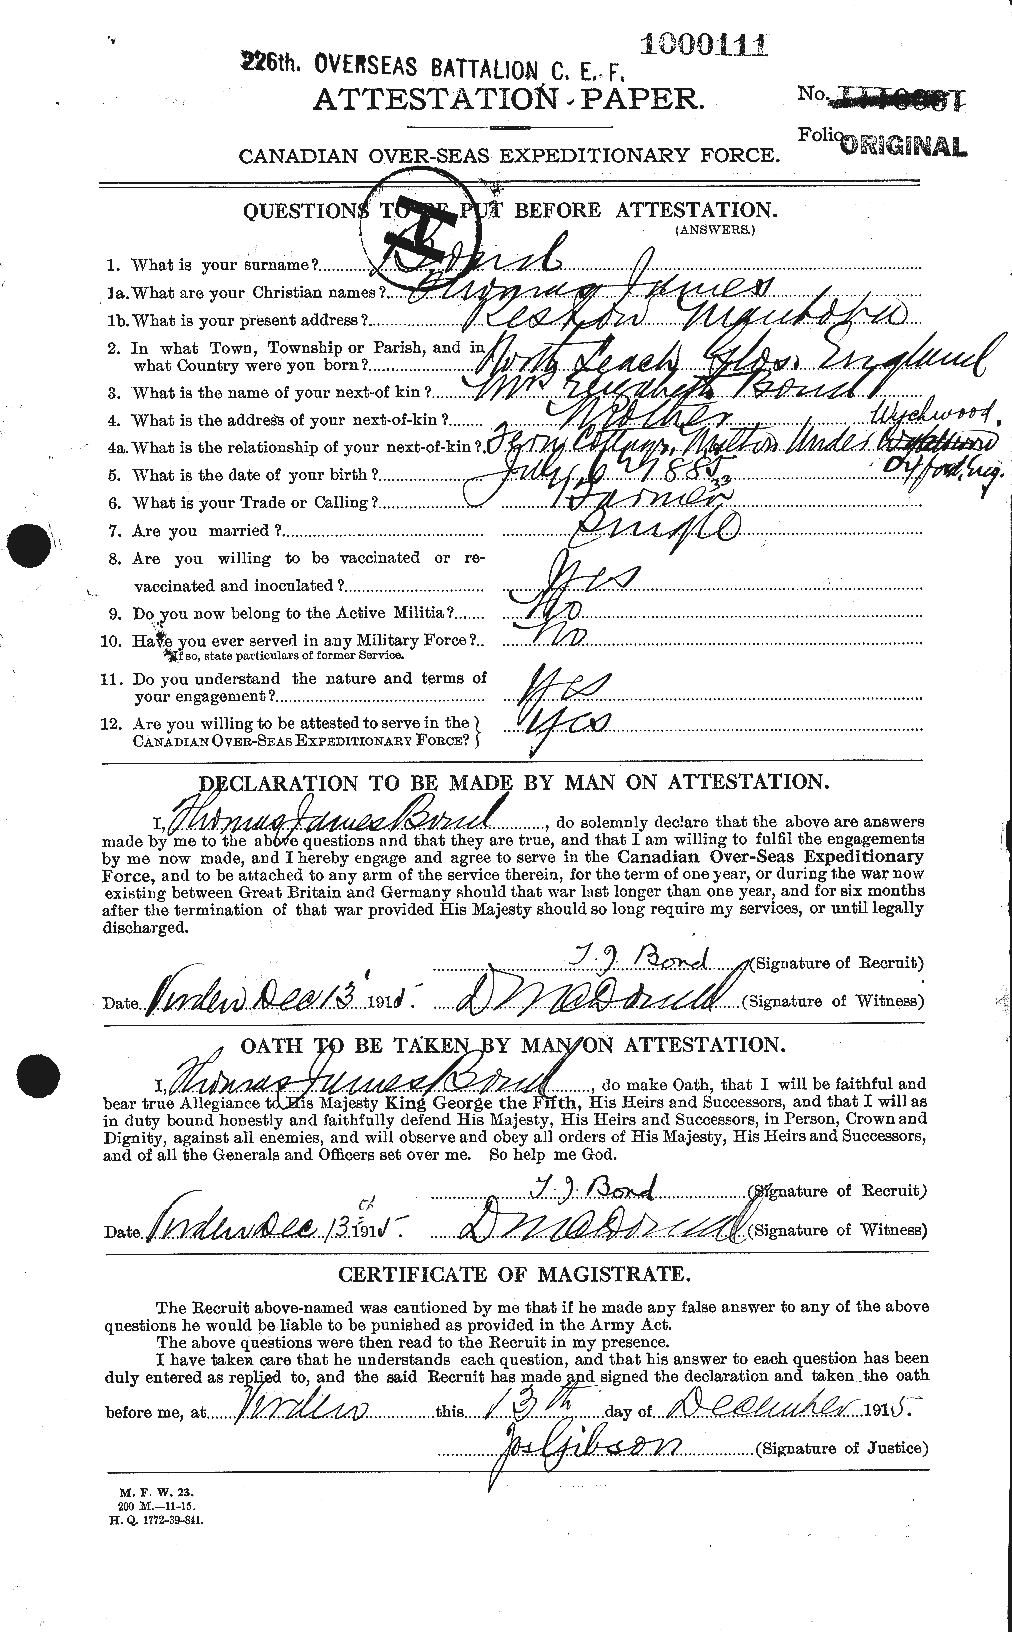 Personnel Records of the First World War - CEF 250437a